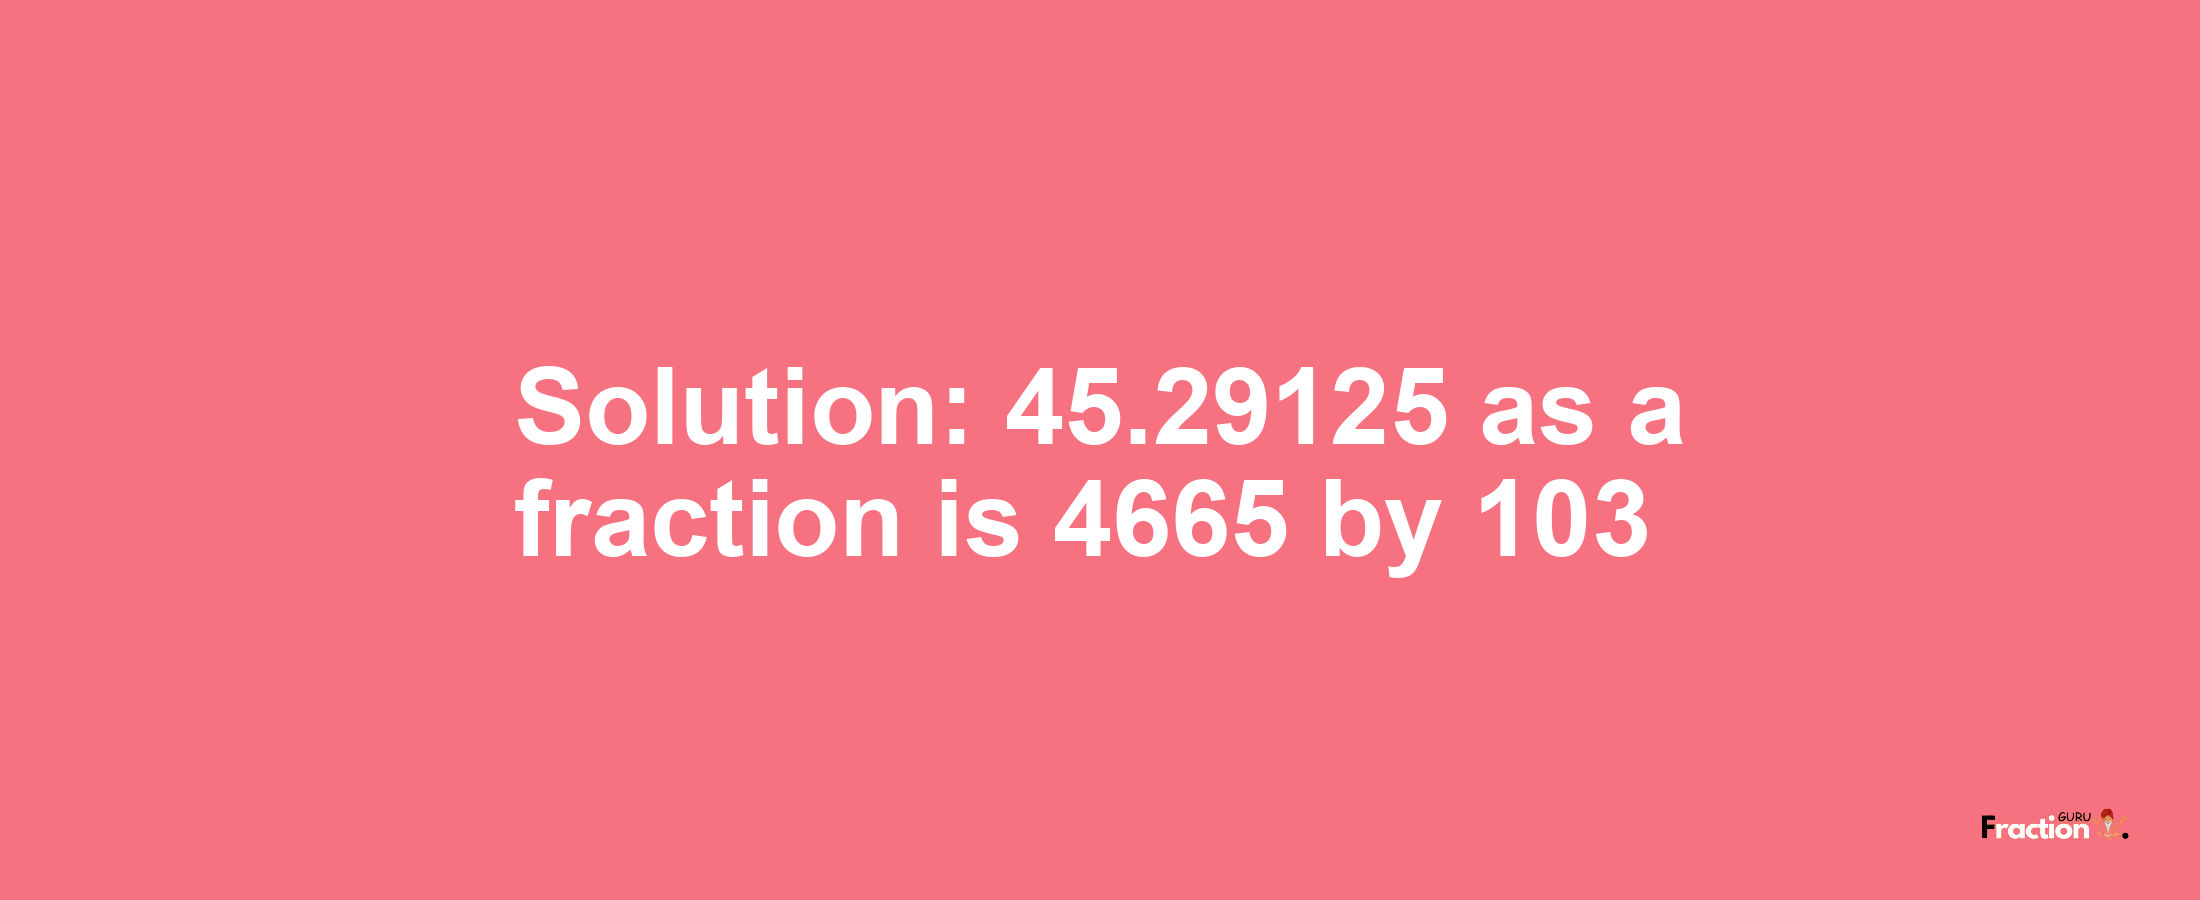 Solution:45.29125 as a fraction is 4665/103